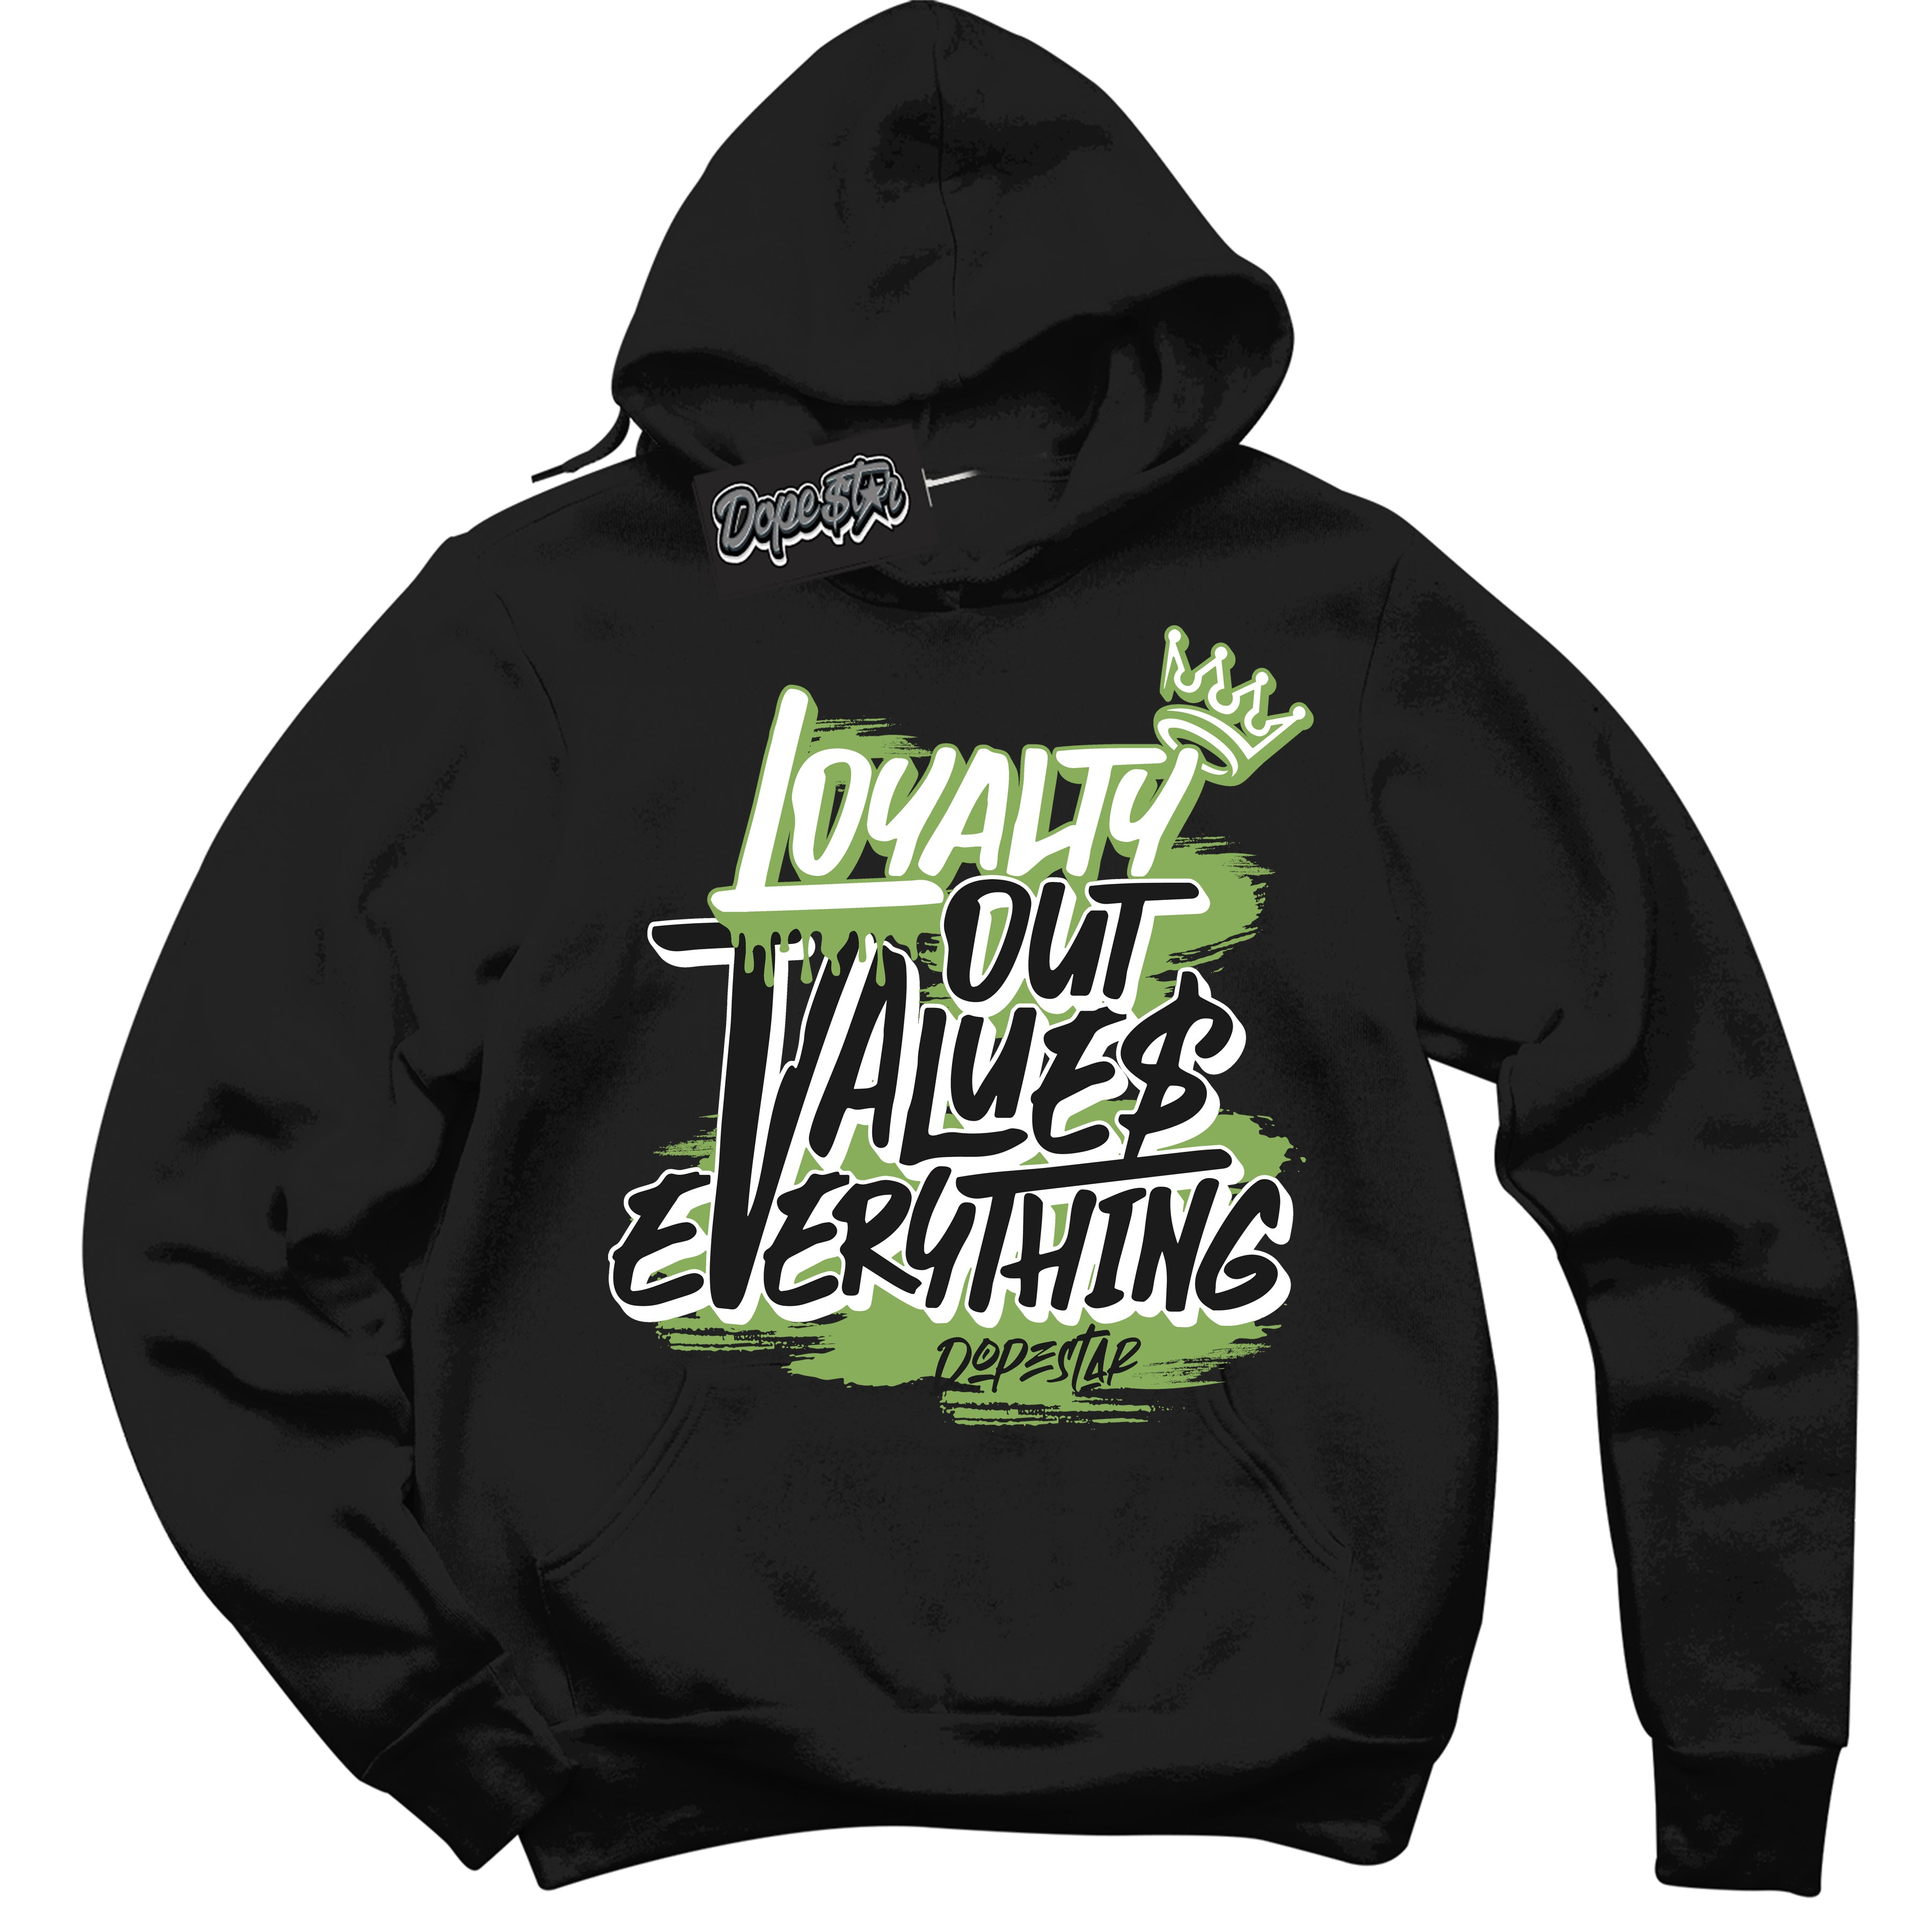 Cool Black Hoodie with “ Loyalty Out Values Everything ”  design that Perfectly Matches Pro x Powerpuff Girls Buttercup Sneakers.